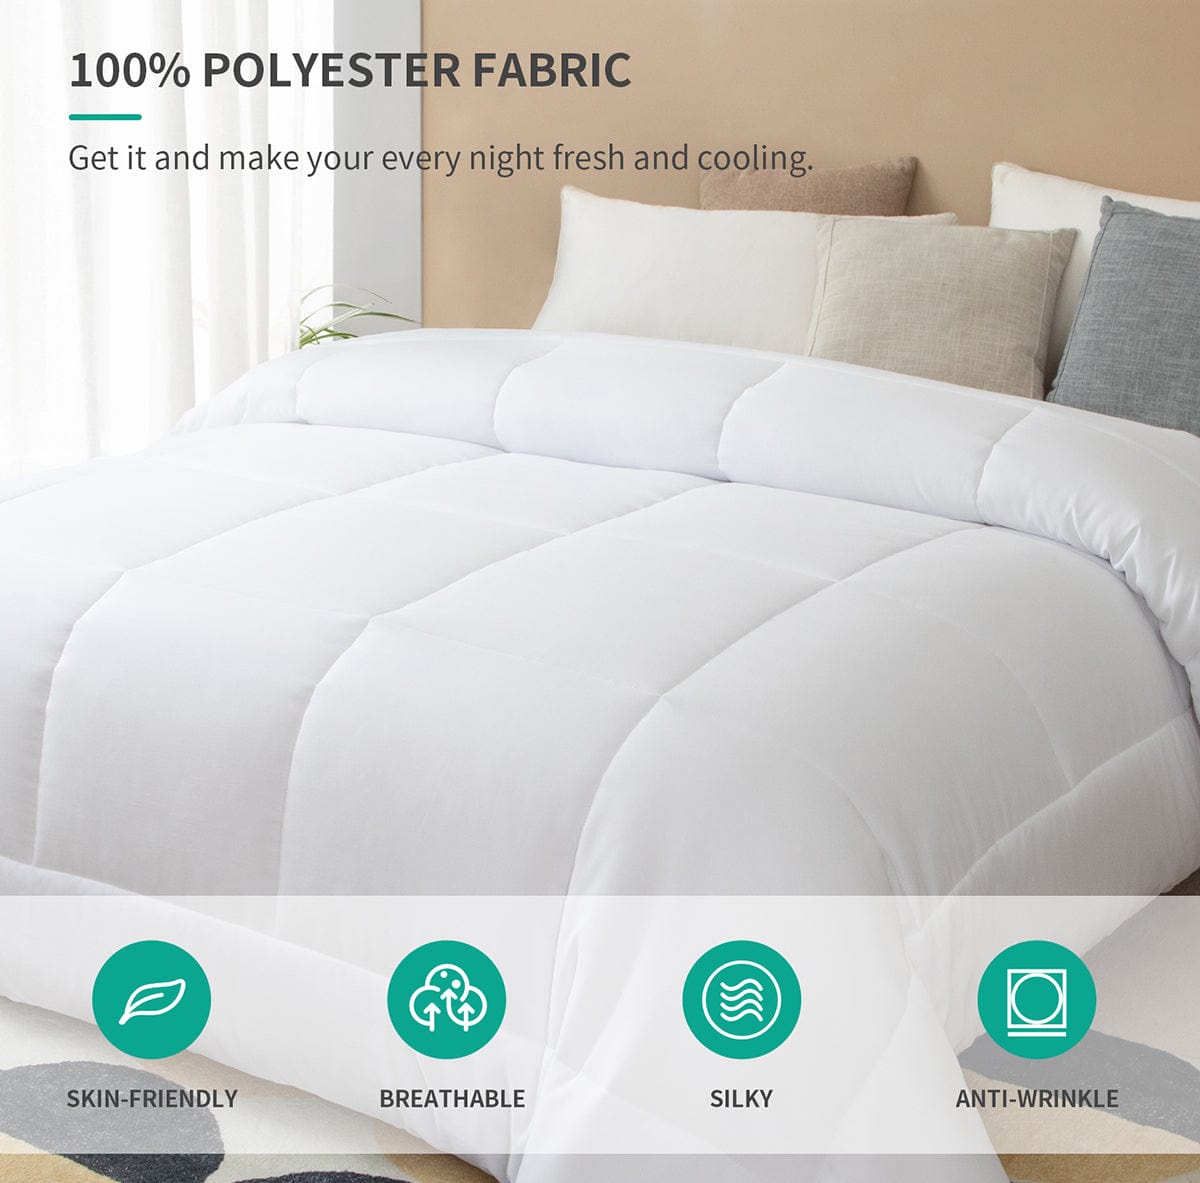 Feather Fabric Comforter